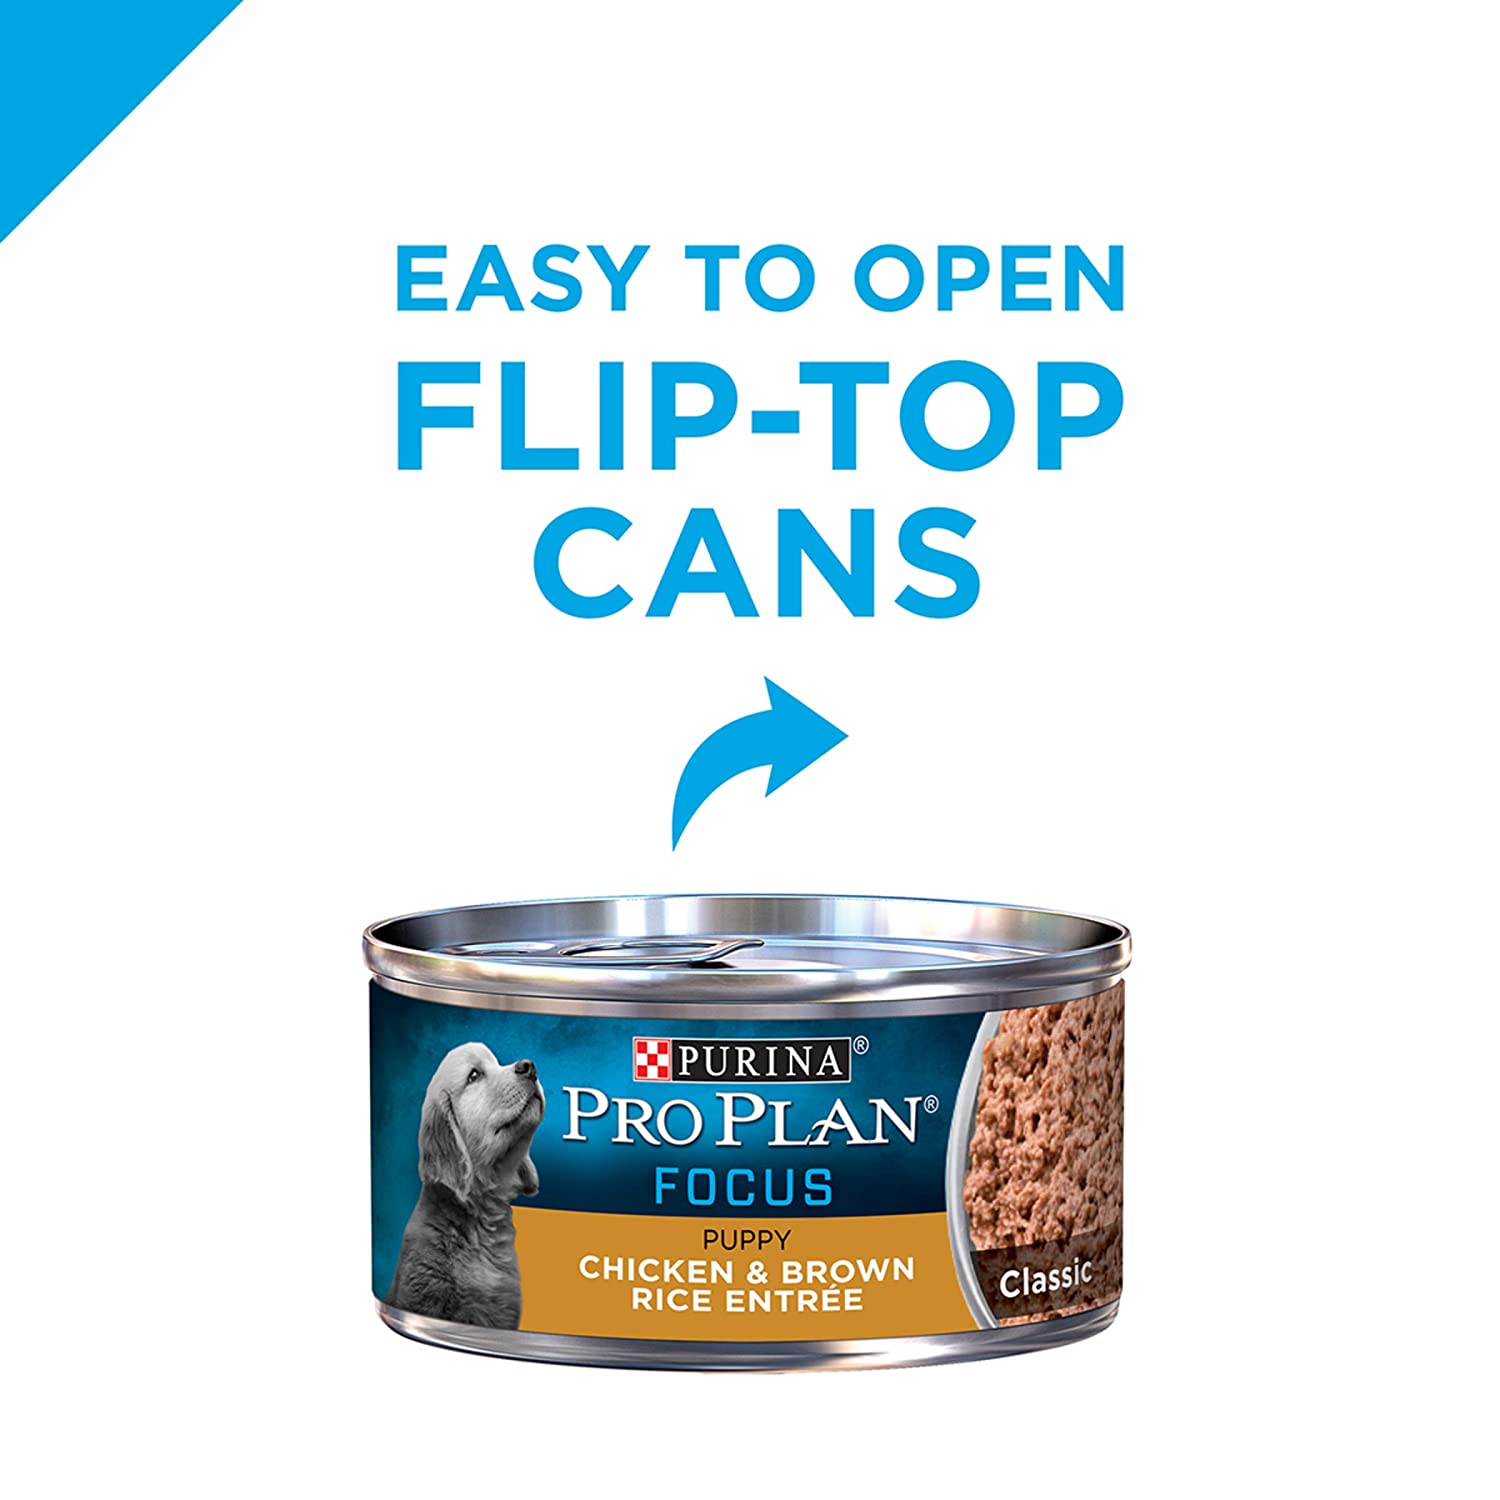 Purina Pro Plan FOCUS Puppy Canned Wet Dog Food